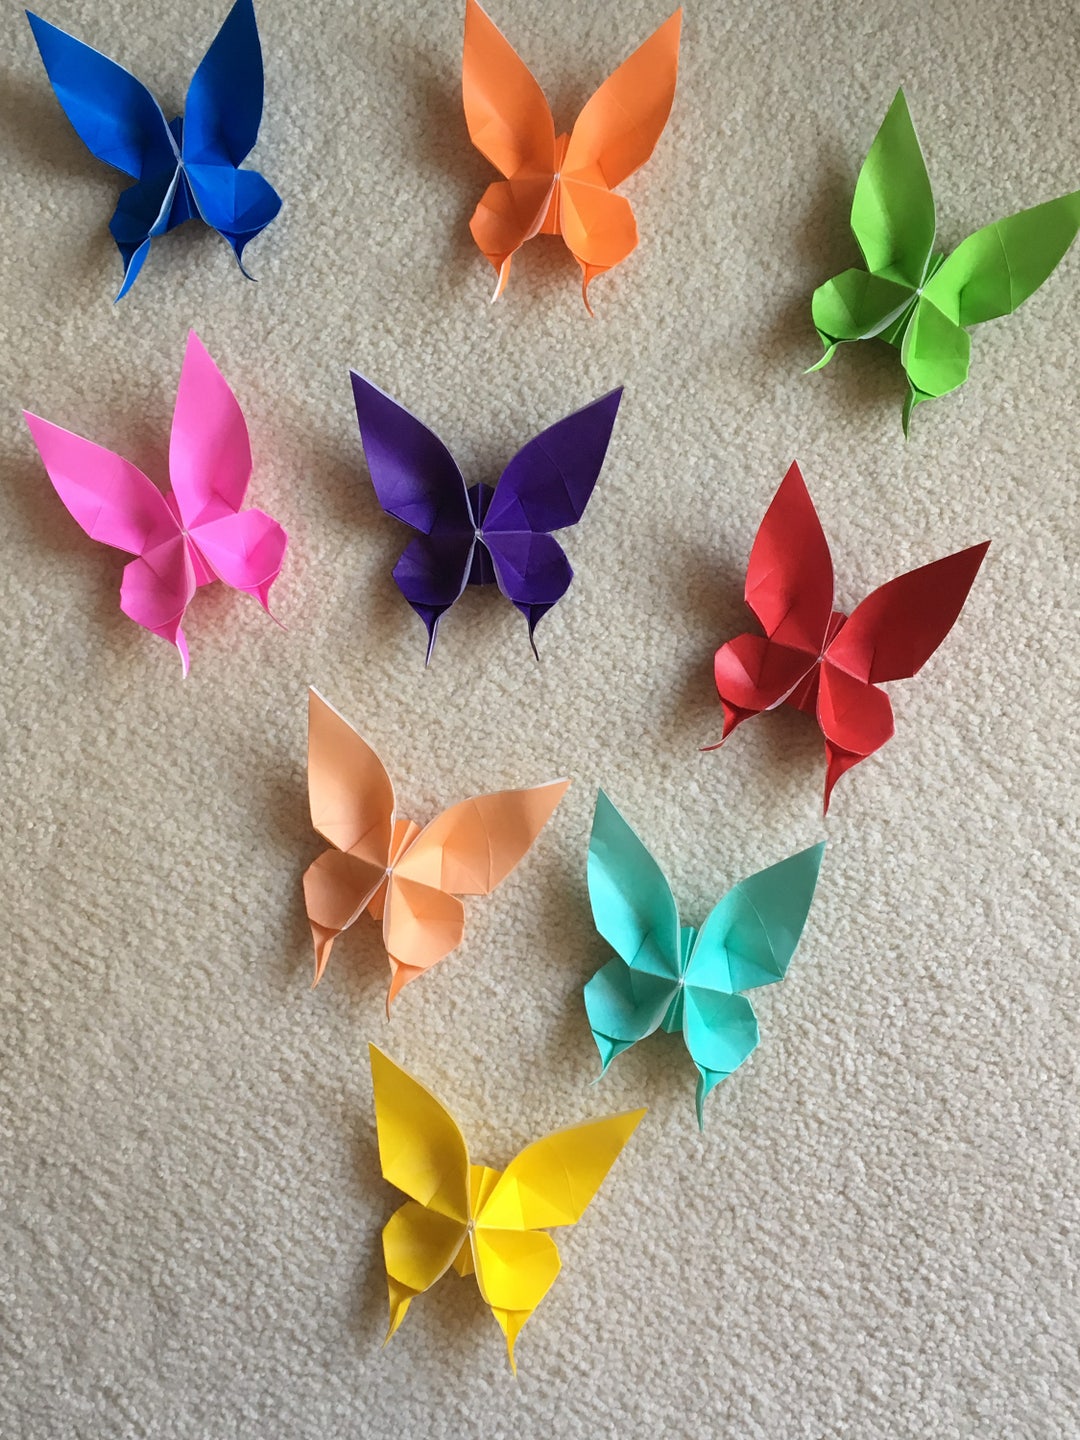 Get Ready for Spring with DIY Origami Paper Butterflies! - Playfully